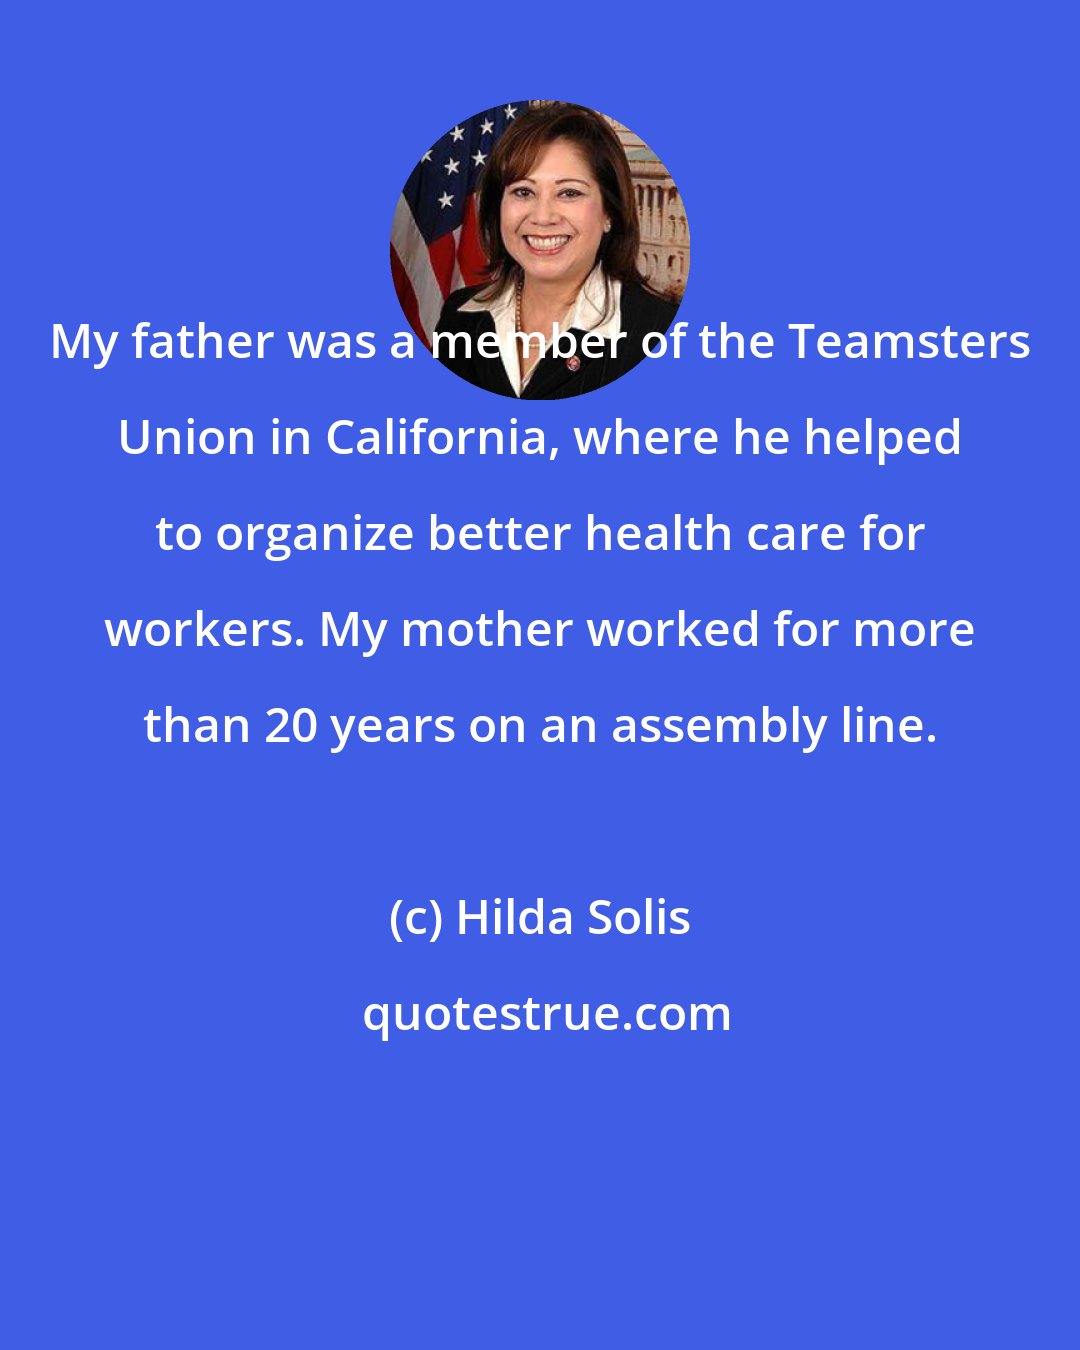 Hilda Solis: My father was a member of the Teamsters Union in California, where he helped to organize better health care for workers. My mother worked for more than 20 years on an assembly line.